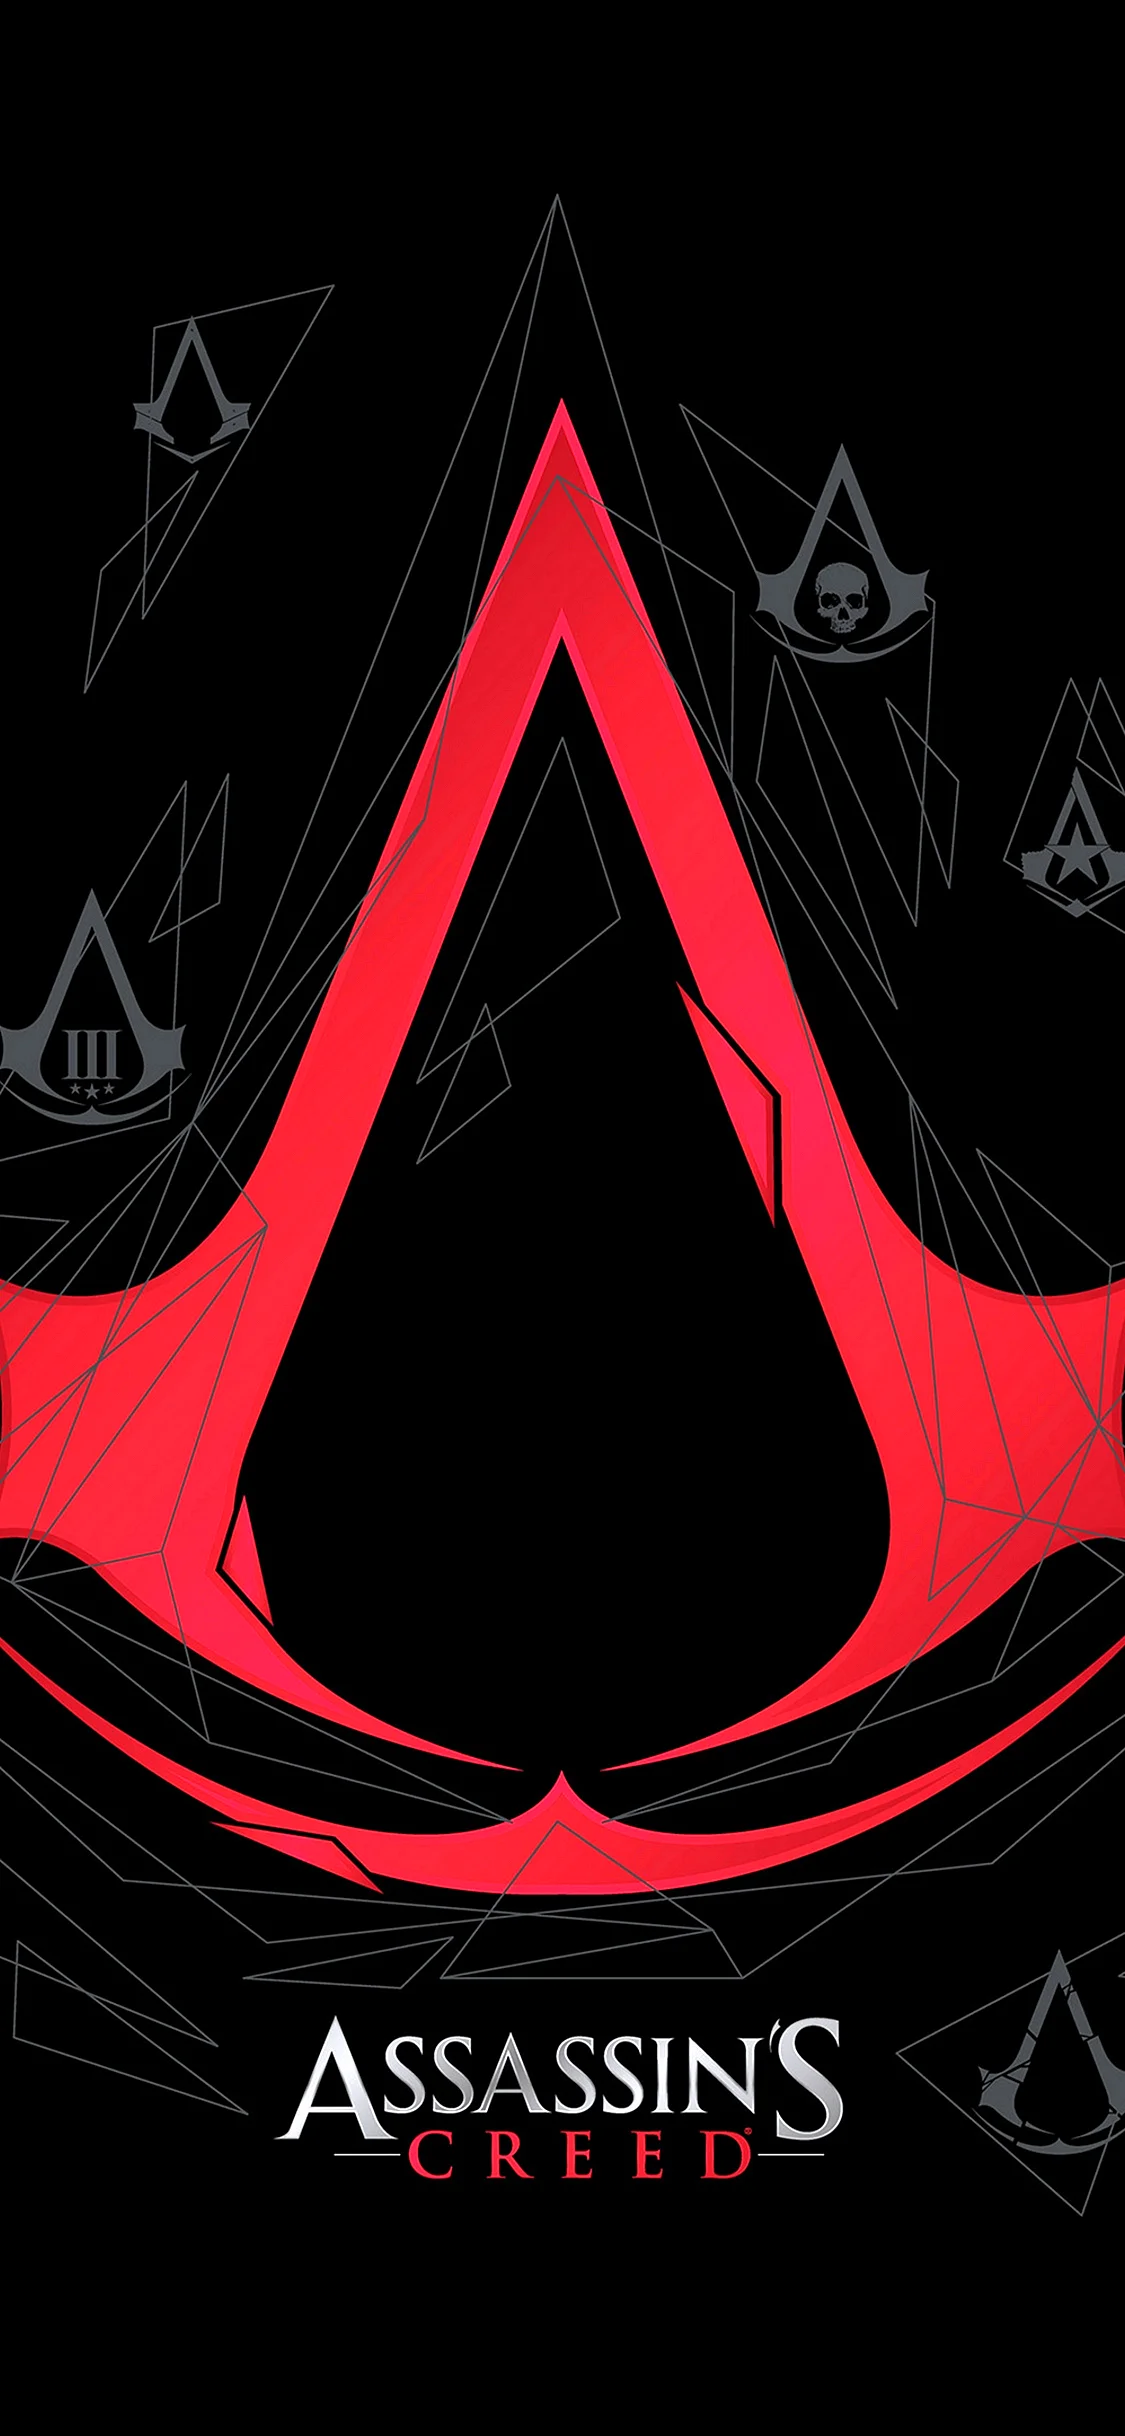 Assassins Creed Logo Wallpaper for iPhone 11 Pro